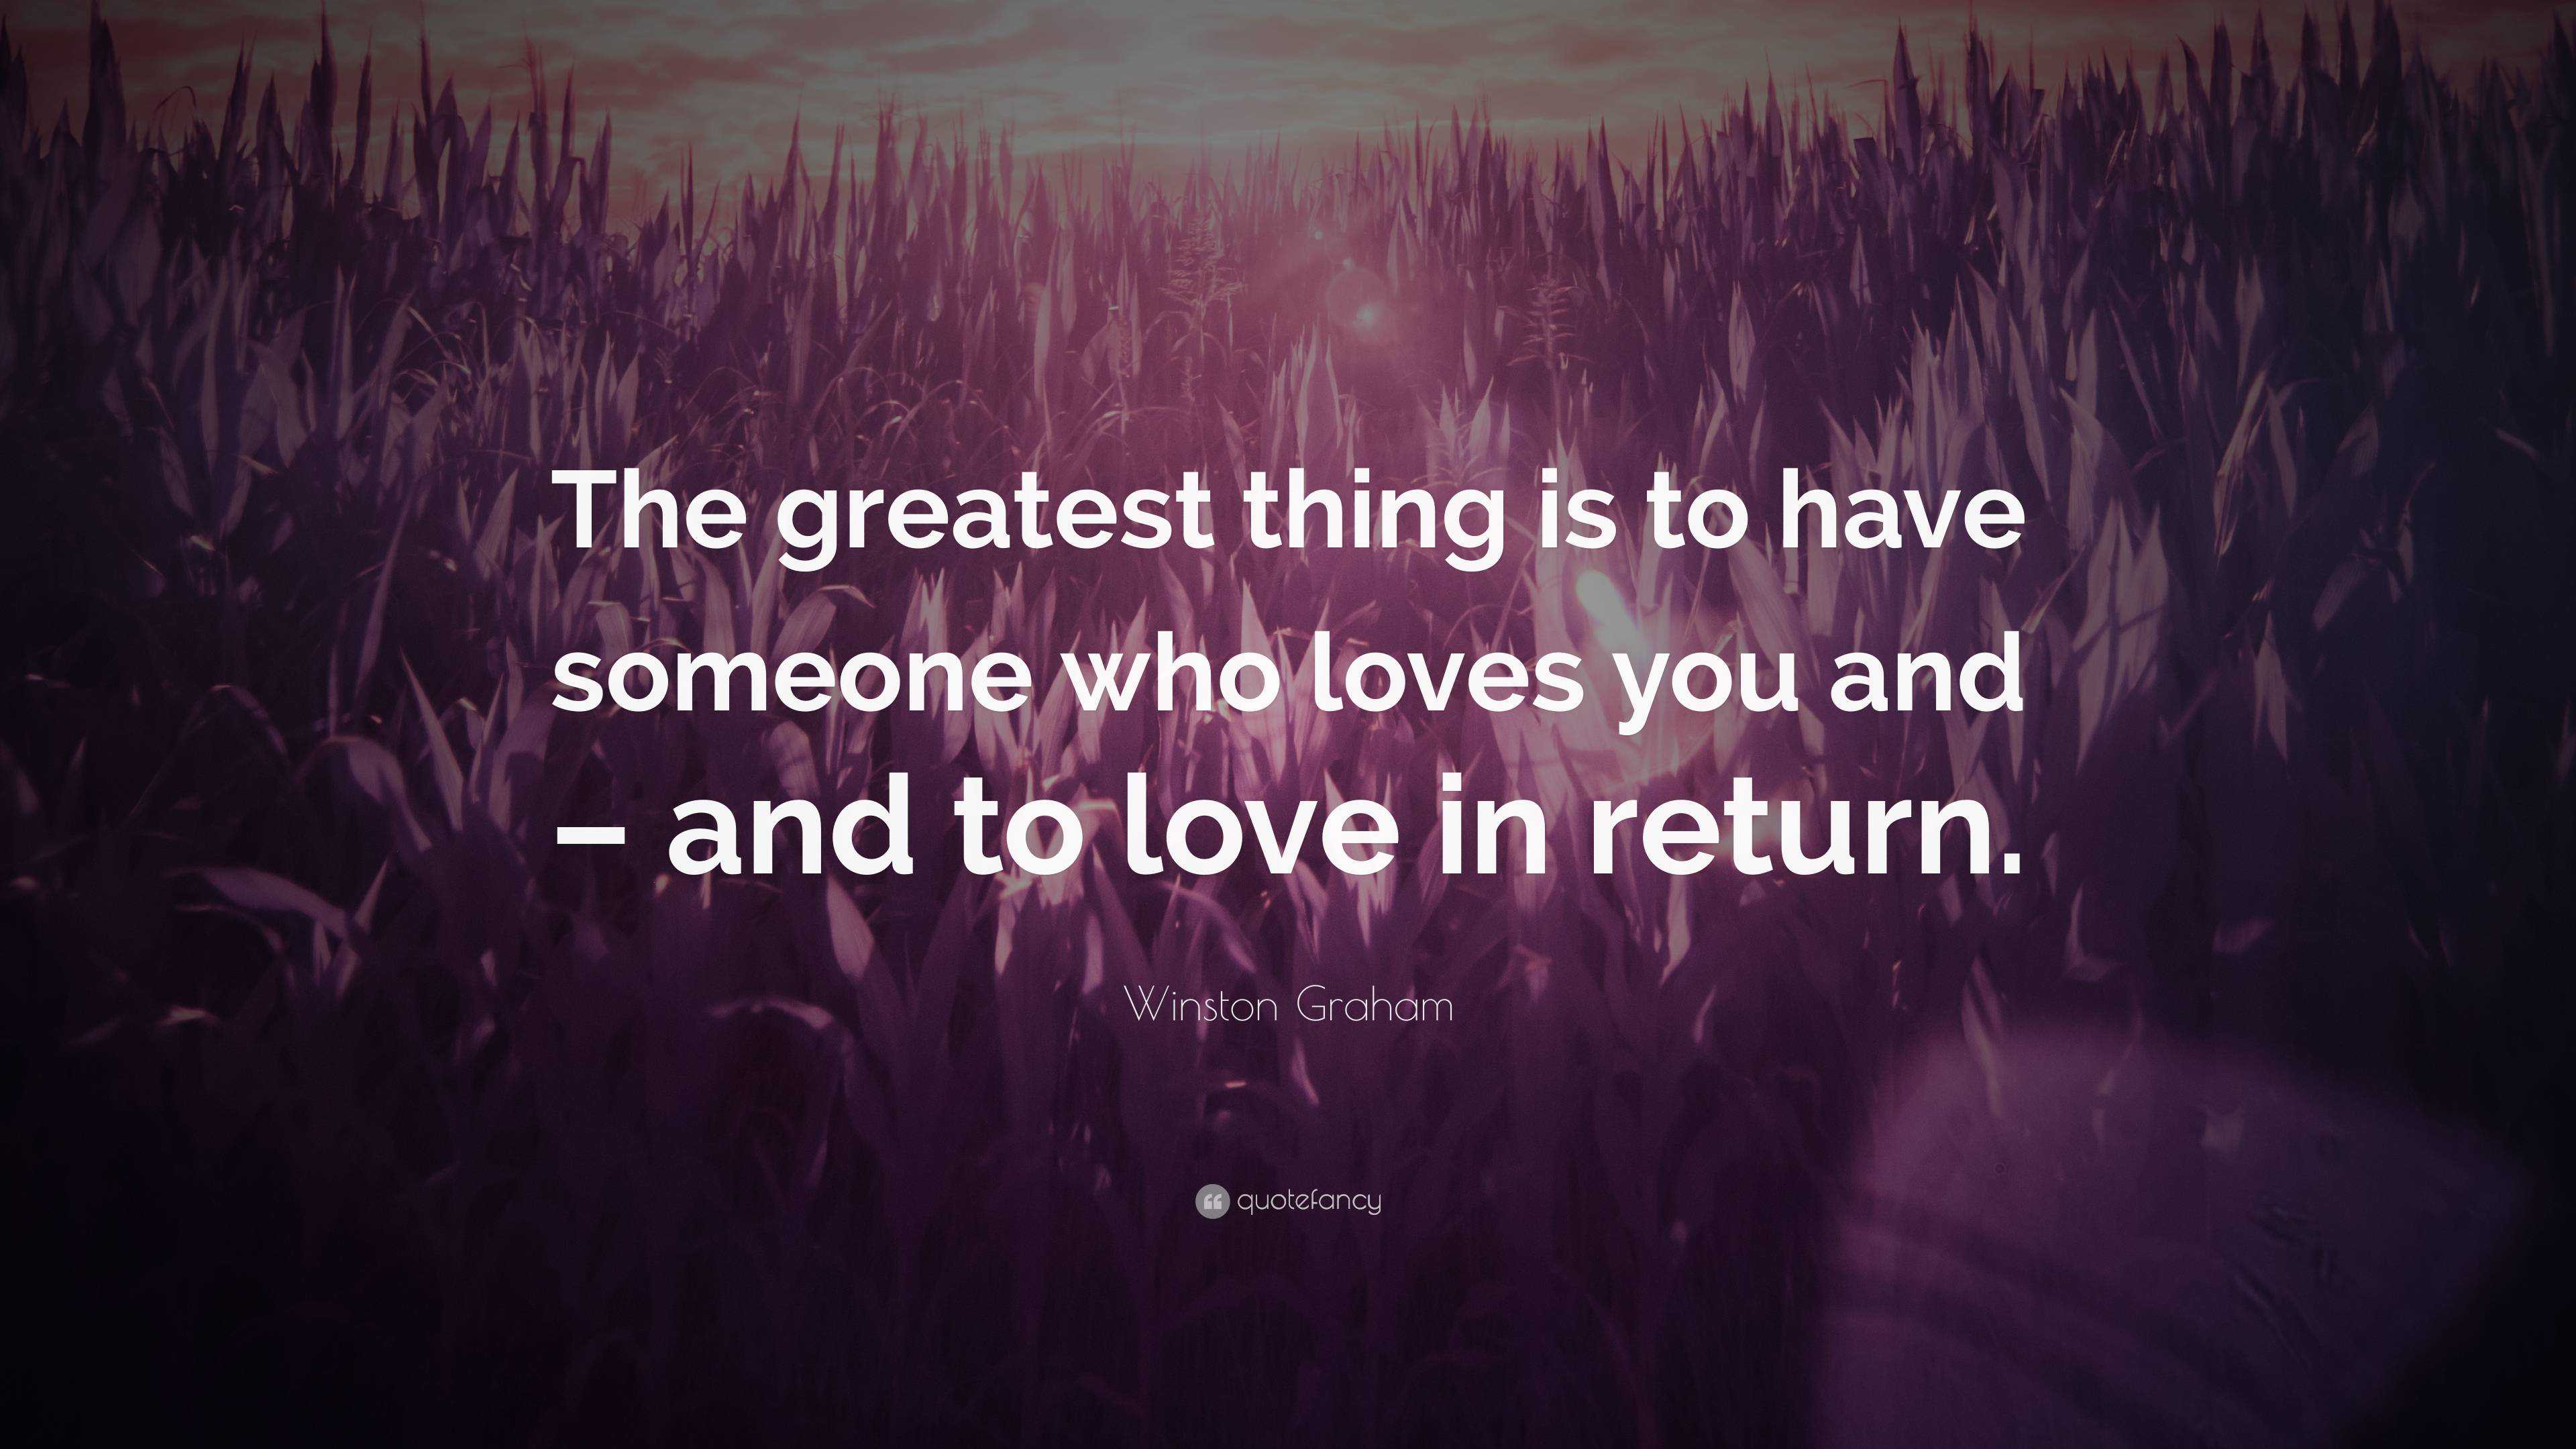 Winston Graham Quote: “The greatest thing is to have someone who loves ...